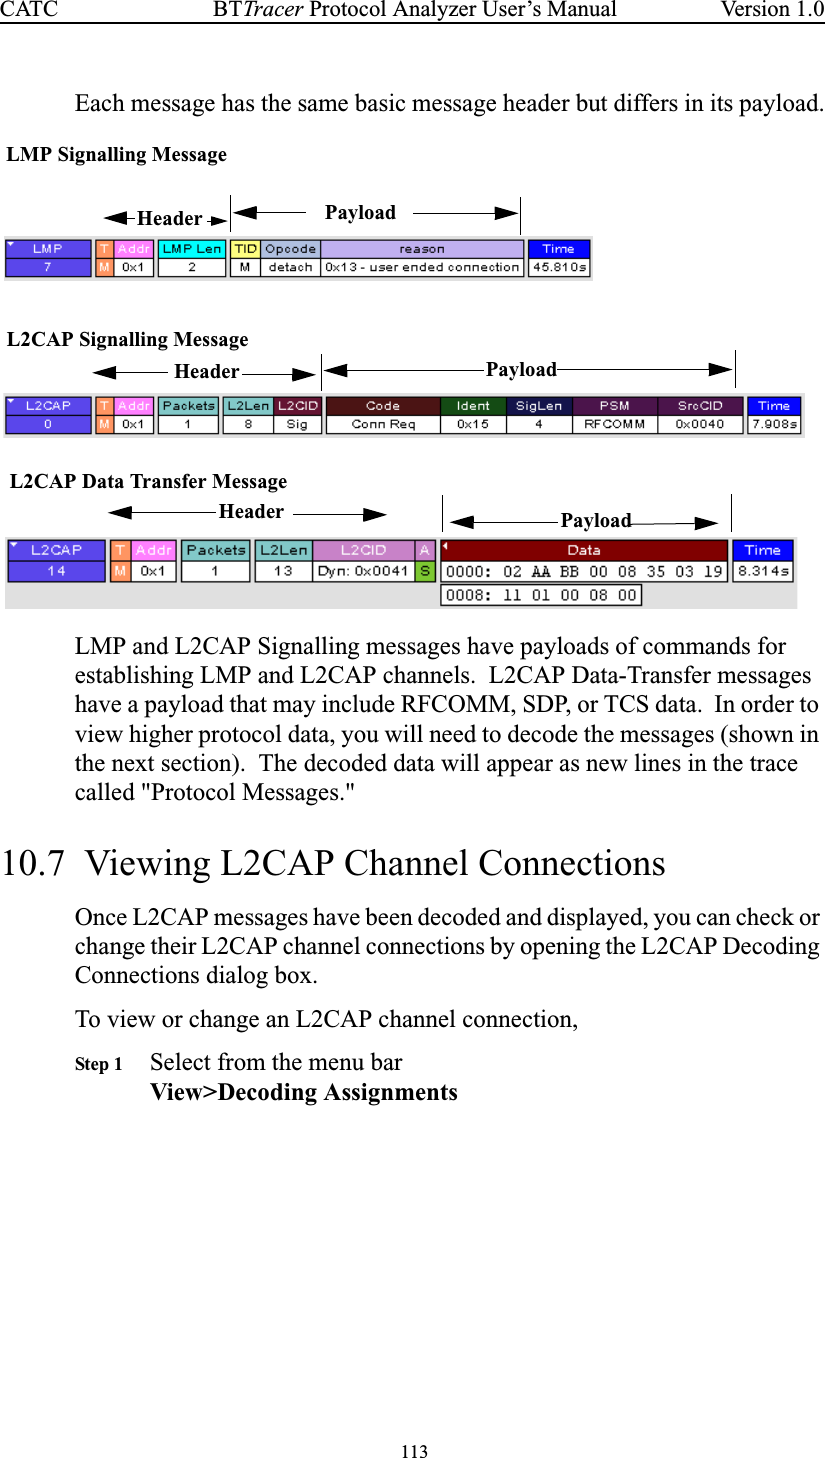 113BTTracer Protocol Analyzer User’s ManualCATC Version 1.0Each message has the same basic message header but differs in its payload.LMP and L2CAP Signalling messages have payloads of commands forestablishing LMP and L2CAP channels. L2CAP Data-Transfer messageshave a payload that may include RFCOMM, SDP, or TCS data. In order toview higher protocol data, you will need to decode the messages (shown inthe next section). The decoded data will appear as new lines in the tracecalled &quot;Protocol Messages.&quot;10.7 Viewing L2CAP Channel ConnectionsOnce L2CAP messages have been decoded and displayed, you can check orchange their L2CAP channel connections by opening the L2CAP DecodingConnections dialog box.To view or change an L2CAP channel connection,Step 1 Select from the menu barView&gt;Decoding AssignmentsLMP Signalling MessageL2CAP Signalling MessageL2CAP Data Transfer MessagePayloadPayloadHeader PayloadHeaderHeader